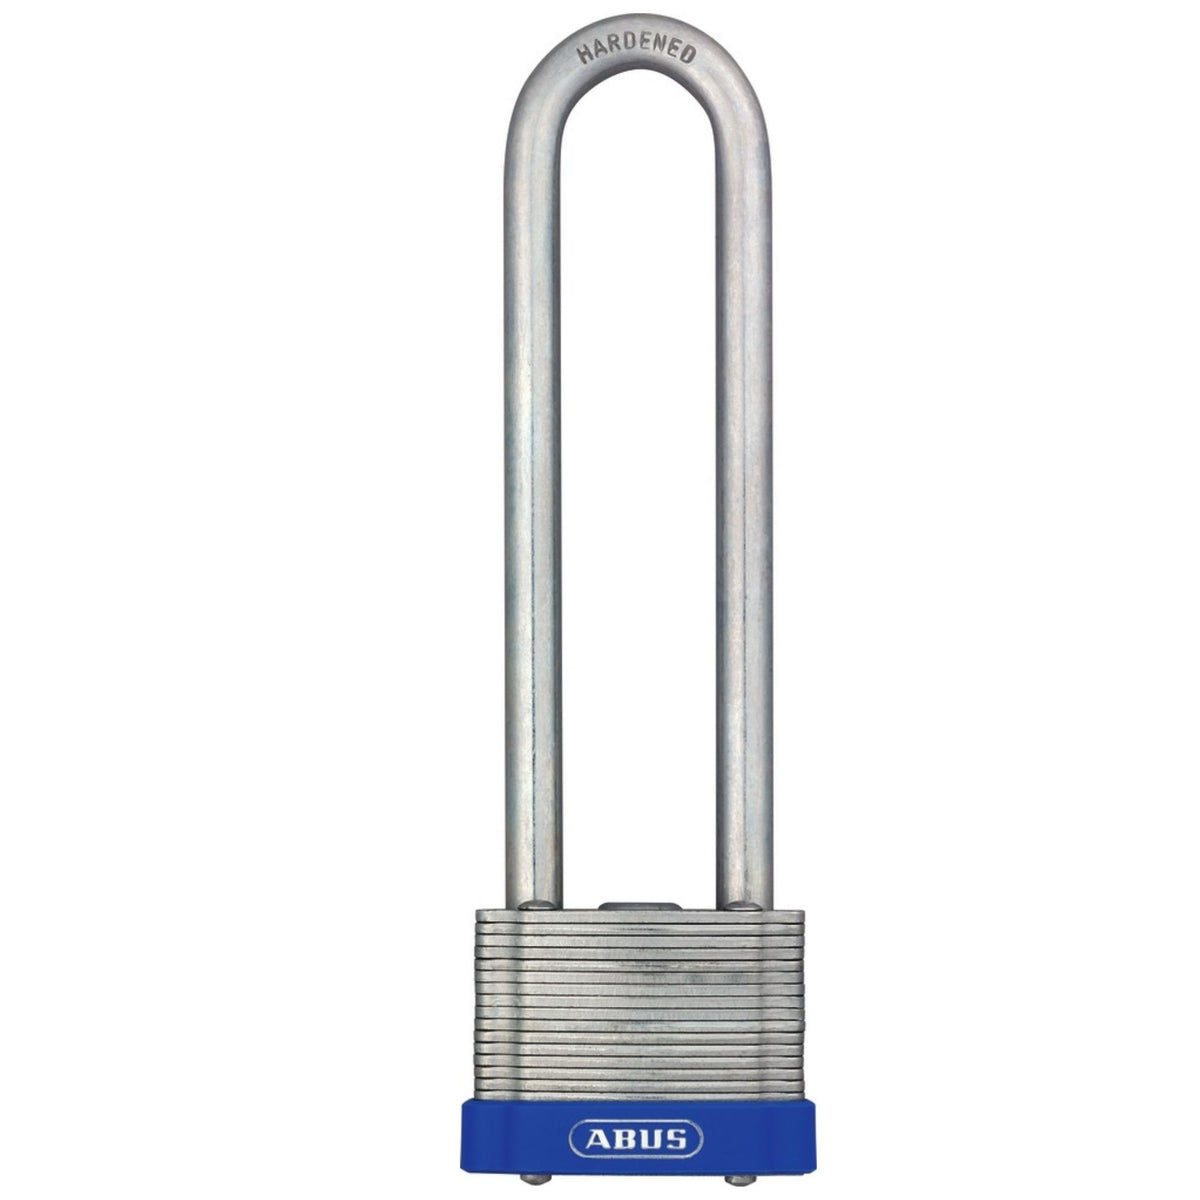 Abus 41/50HB125 KD Laminated Steel Padlock with Eterna Coating and 5-Inch Shackle - The Lock Source